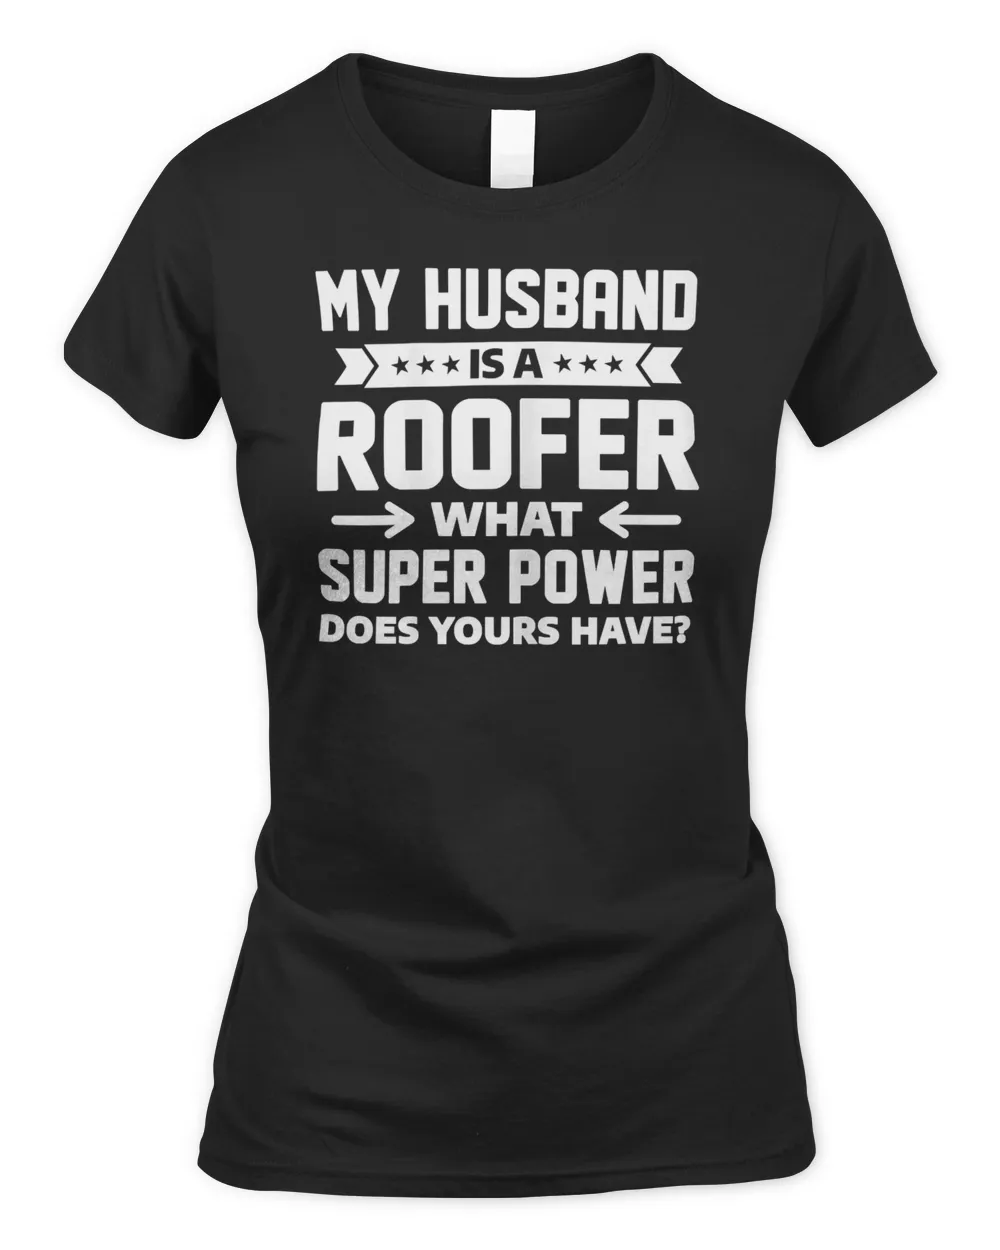 Womens Funny Roofer Family Gift for Proud Wife T-Shirt